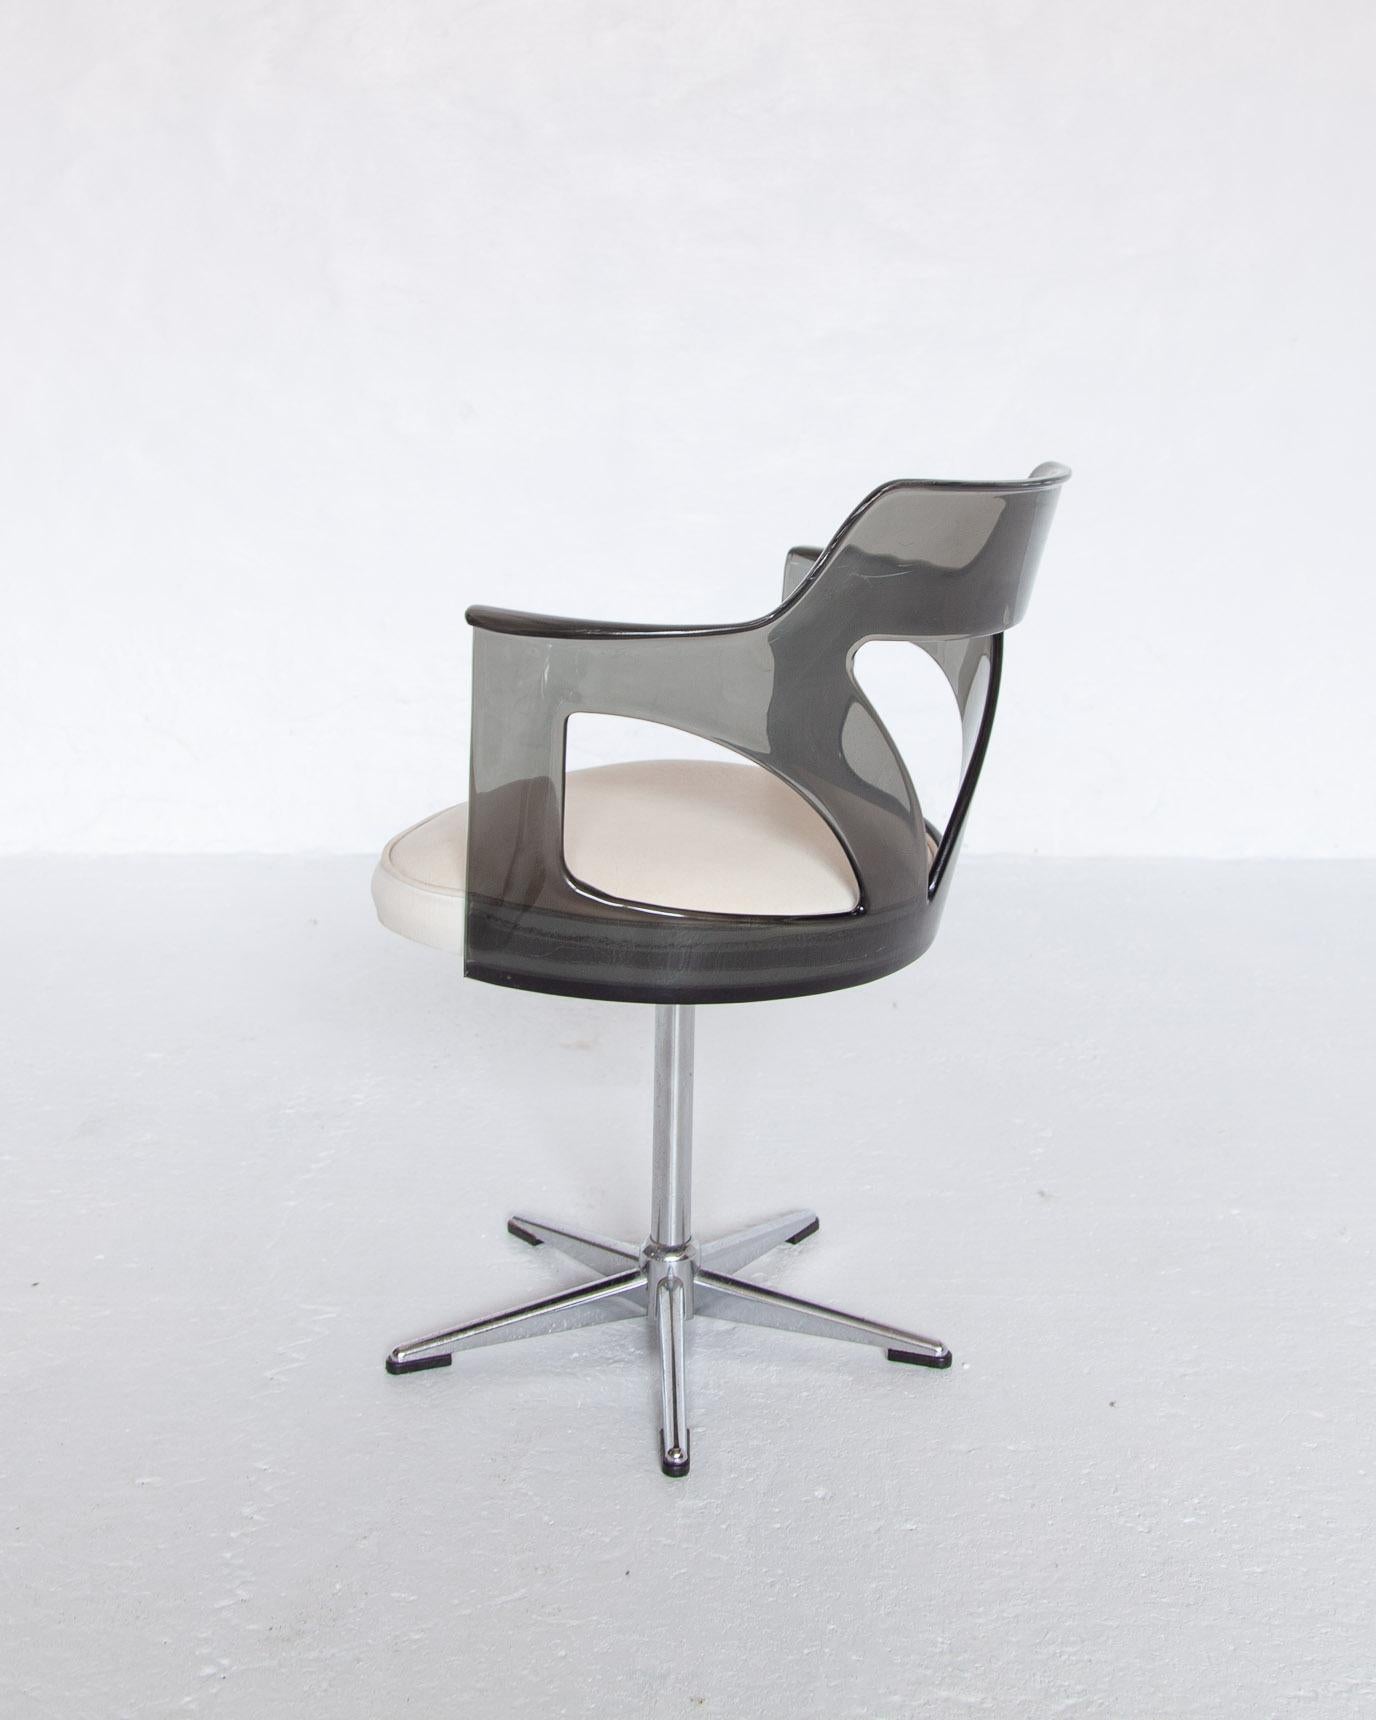 Hand-Crafted Spage Age Smoked Plexi Glass Swivel Desk Chair, 1960s For Sale